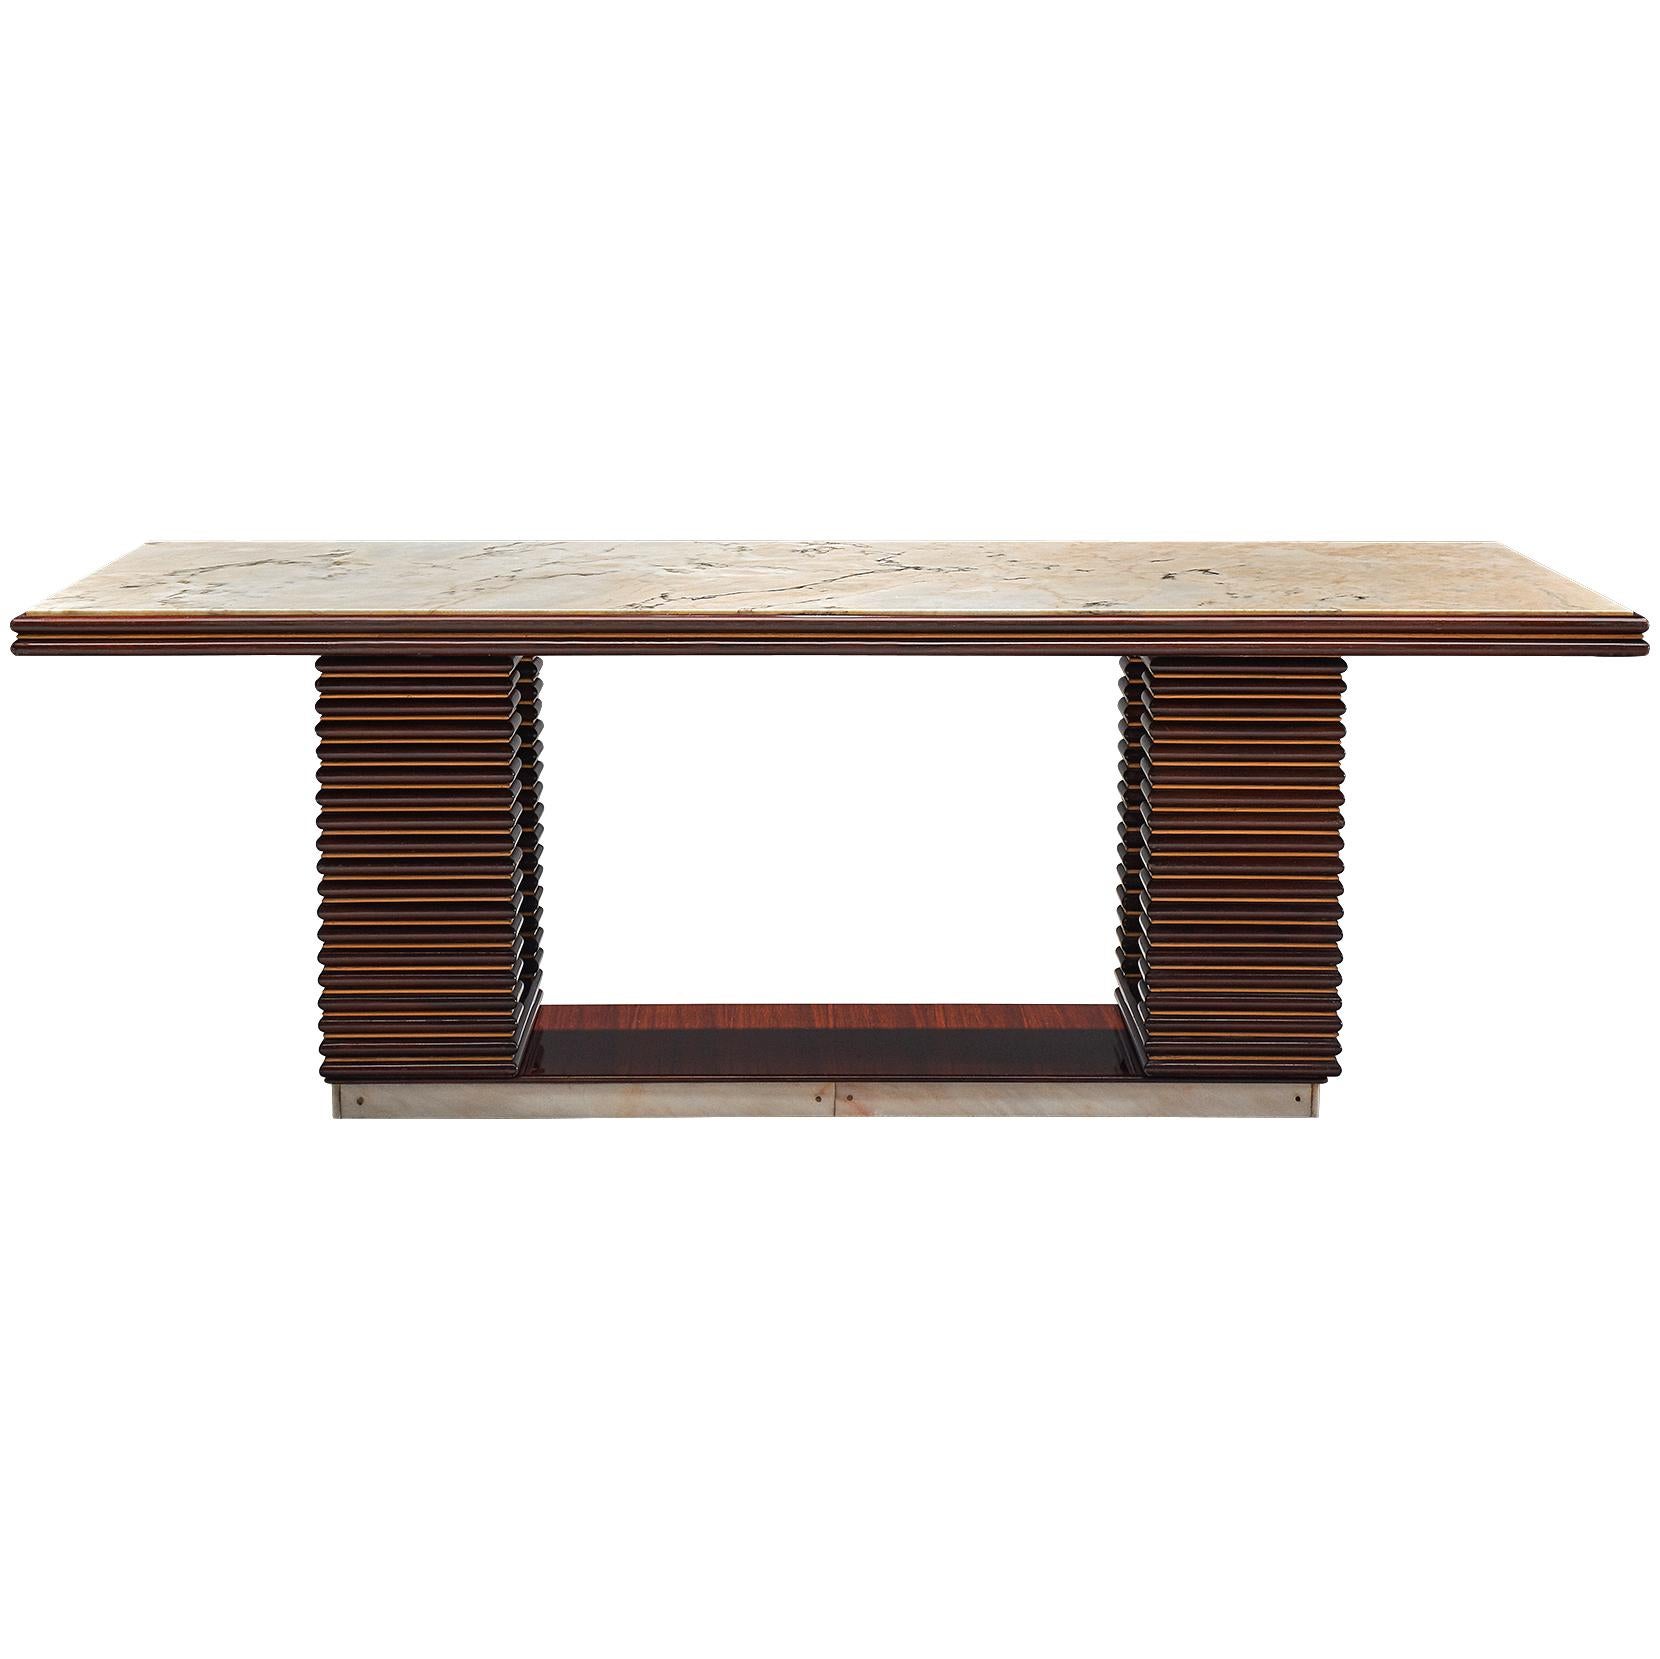 Monumental Italian Dining Table with Marble Top